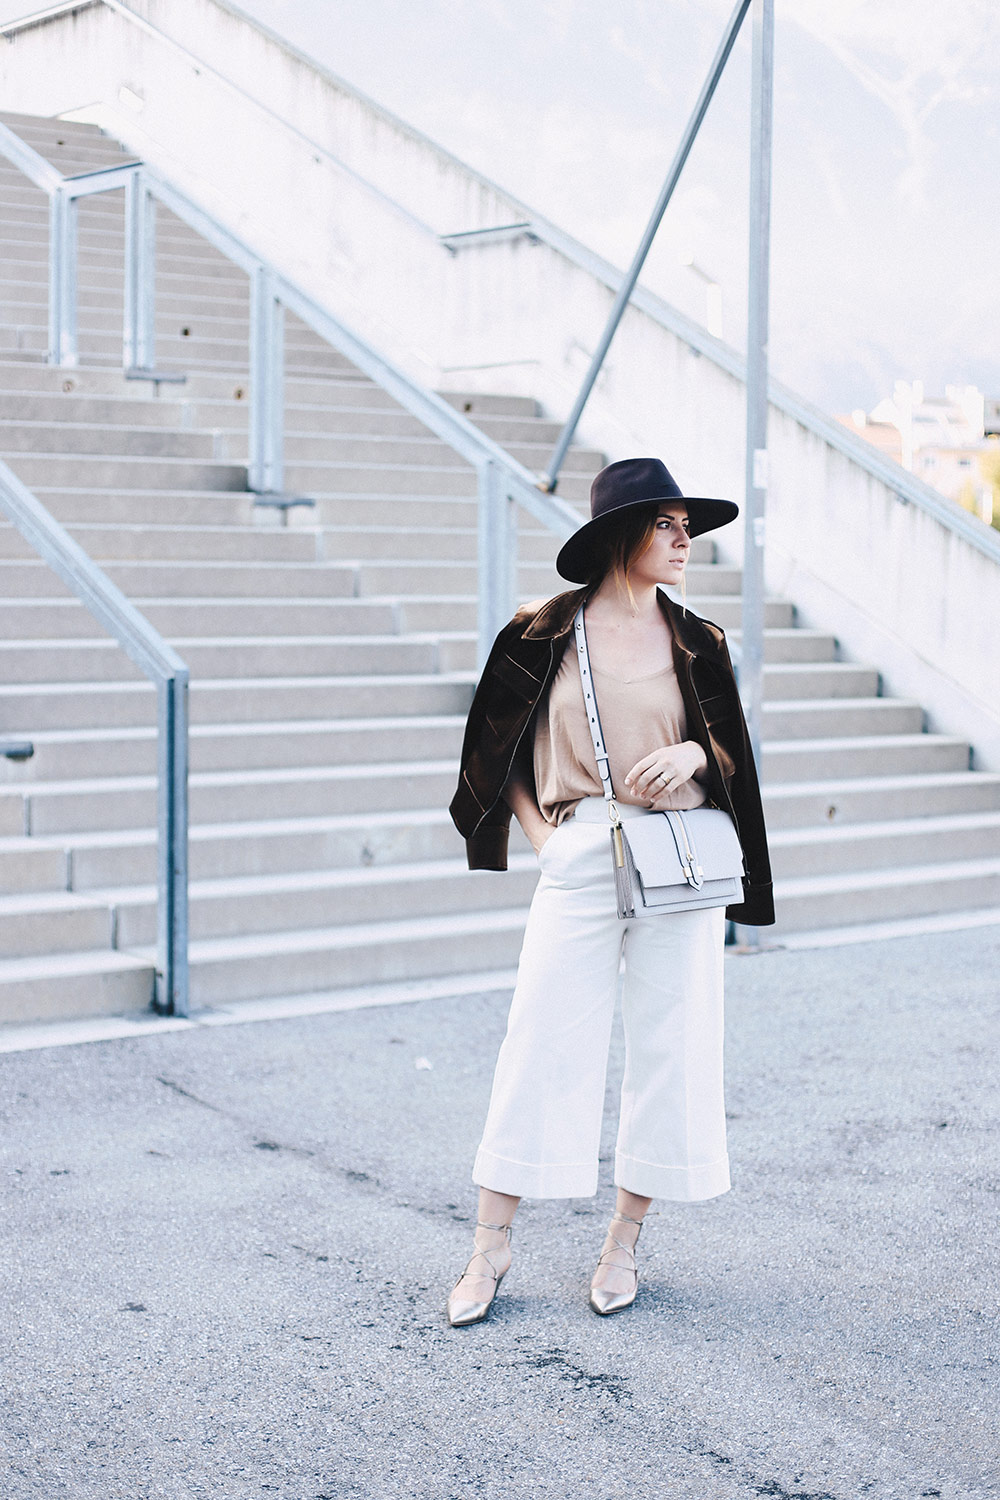 So integriere ich den Samt-Trend in einem Alltags-Outfit, Herbst Outfit, Herbst Trends, Fashion Magazin, Fashion Blog, Modeblog, Culotte, Streetstyle, whoismocca.com